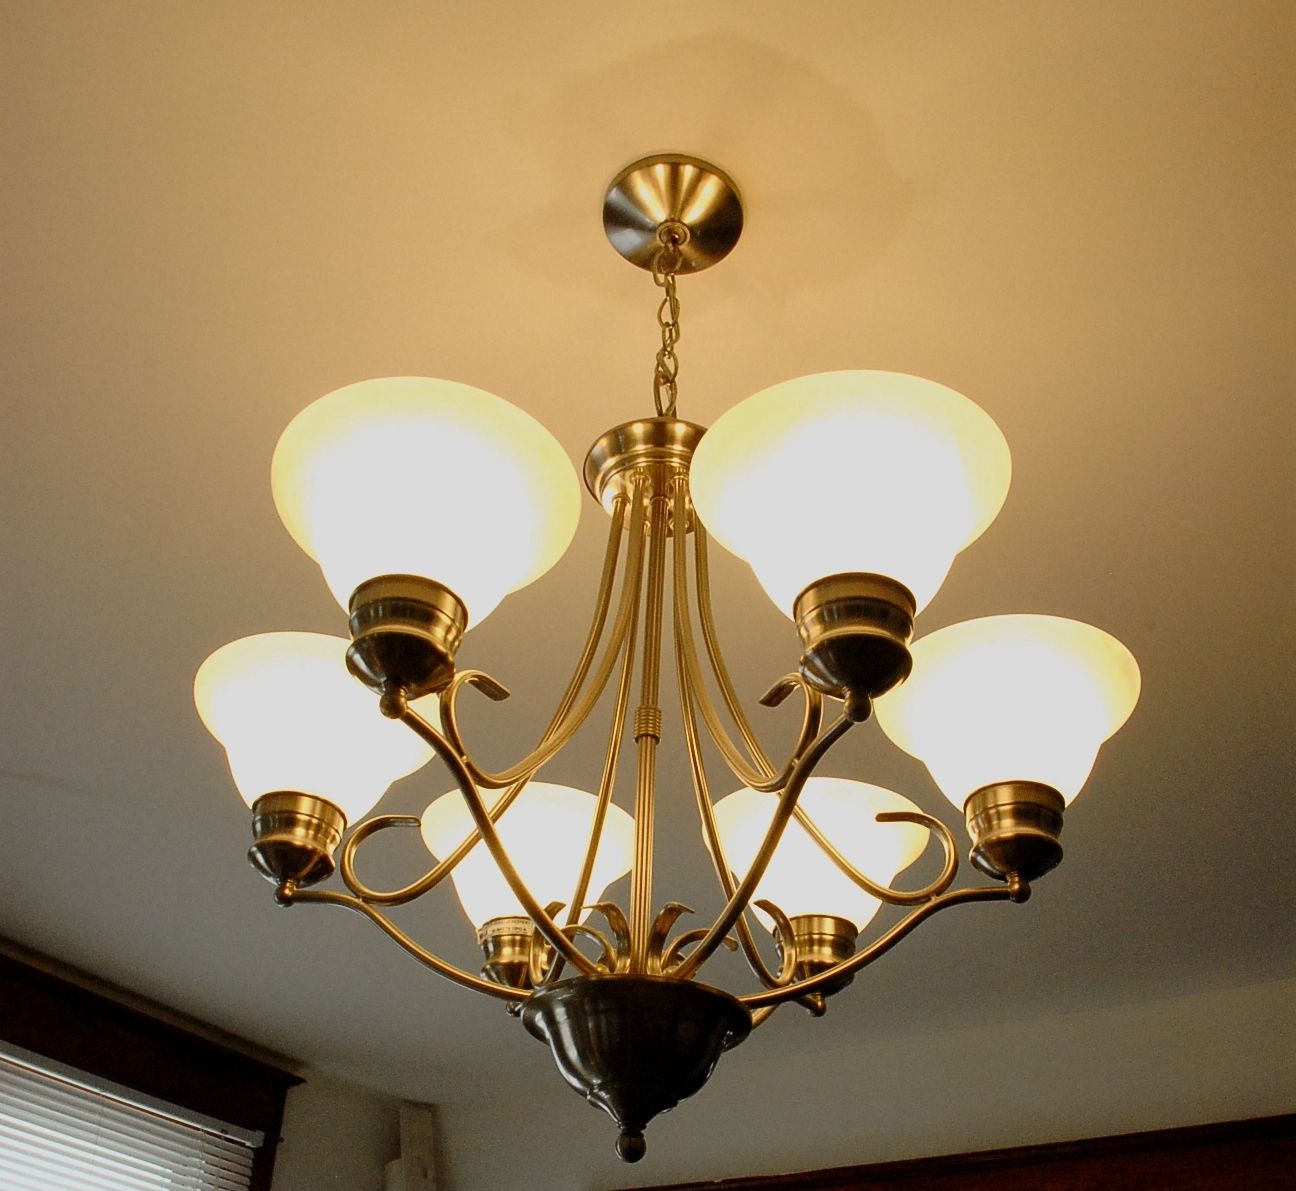 Chandeliers Wall Sconces And Light Fixtures Dining Rooms And For Ornate Chandeliers (View 5 of 12)